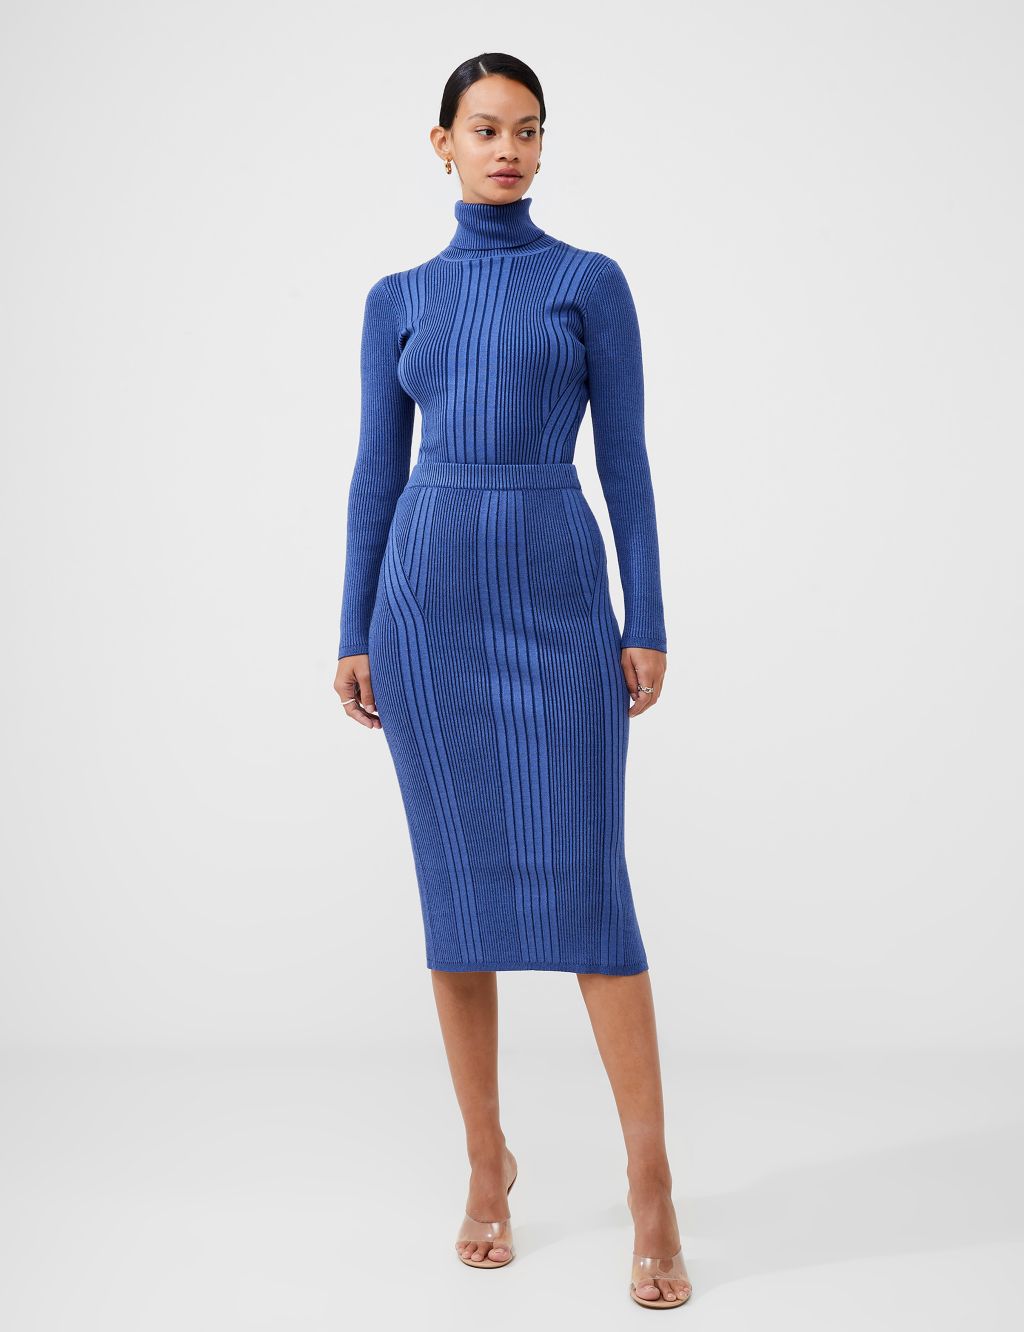 Striped Ribbed Knitted Midi Pencil Skirt image 1